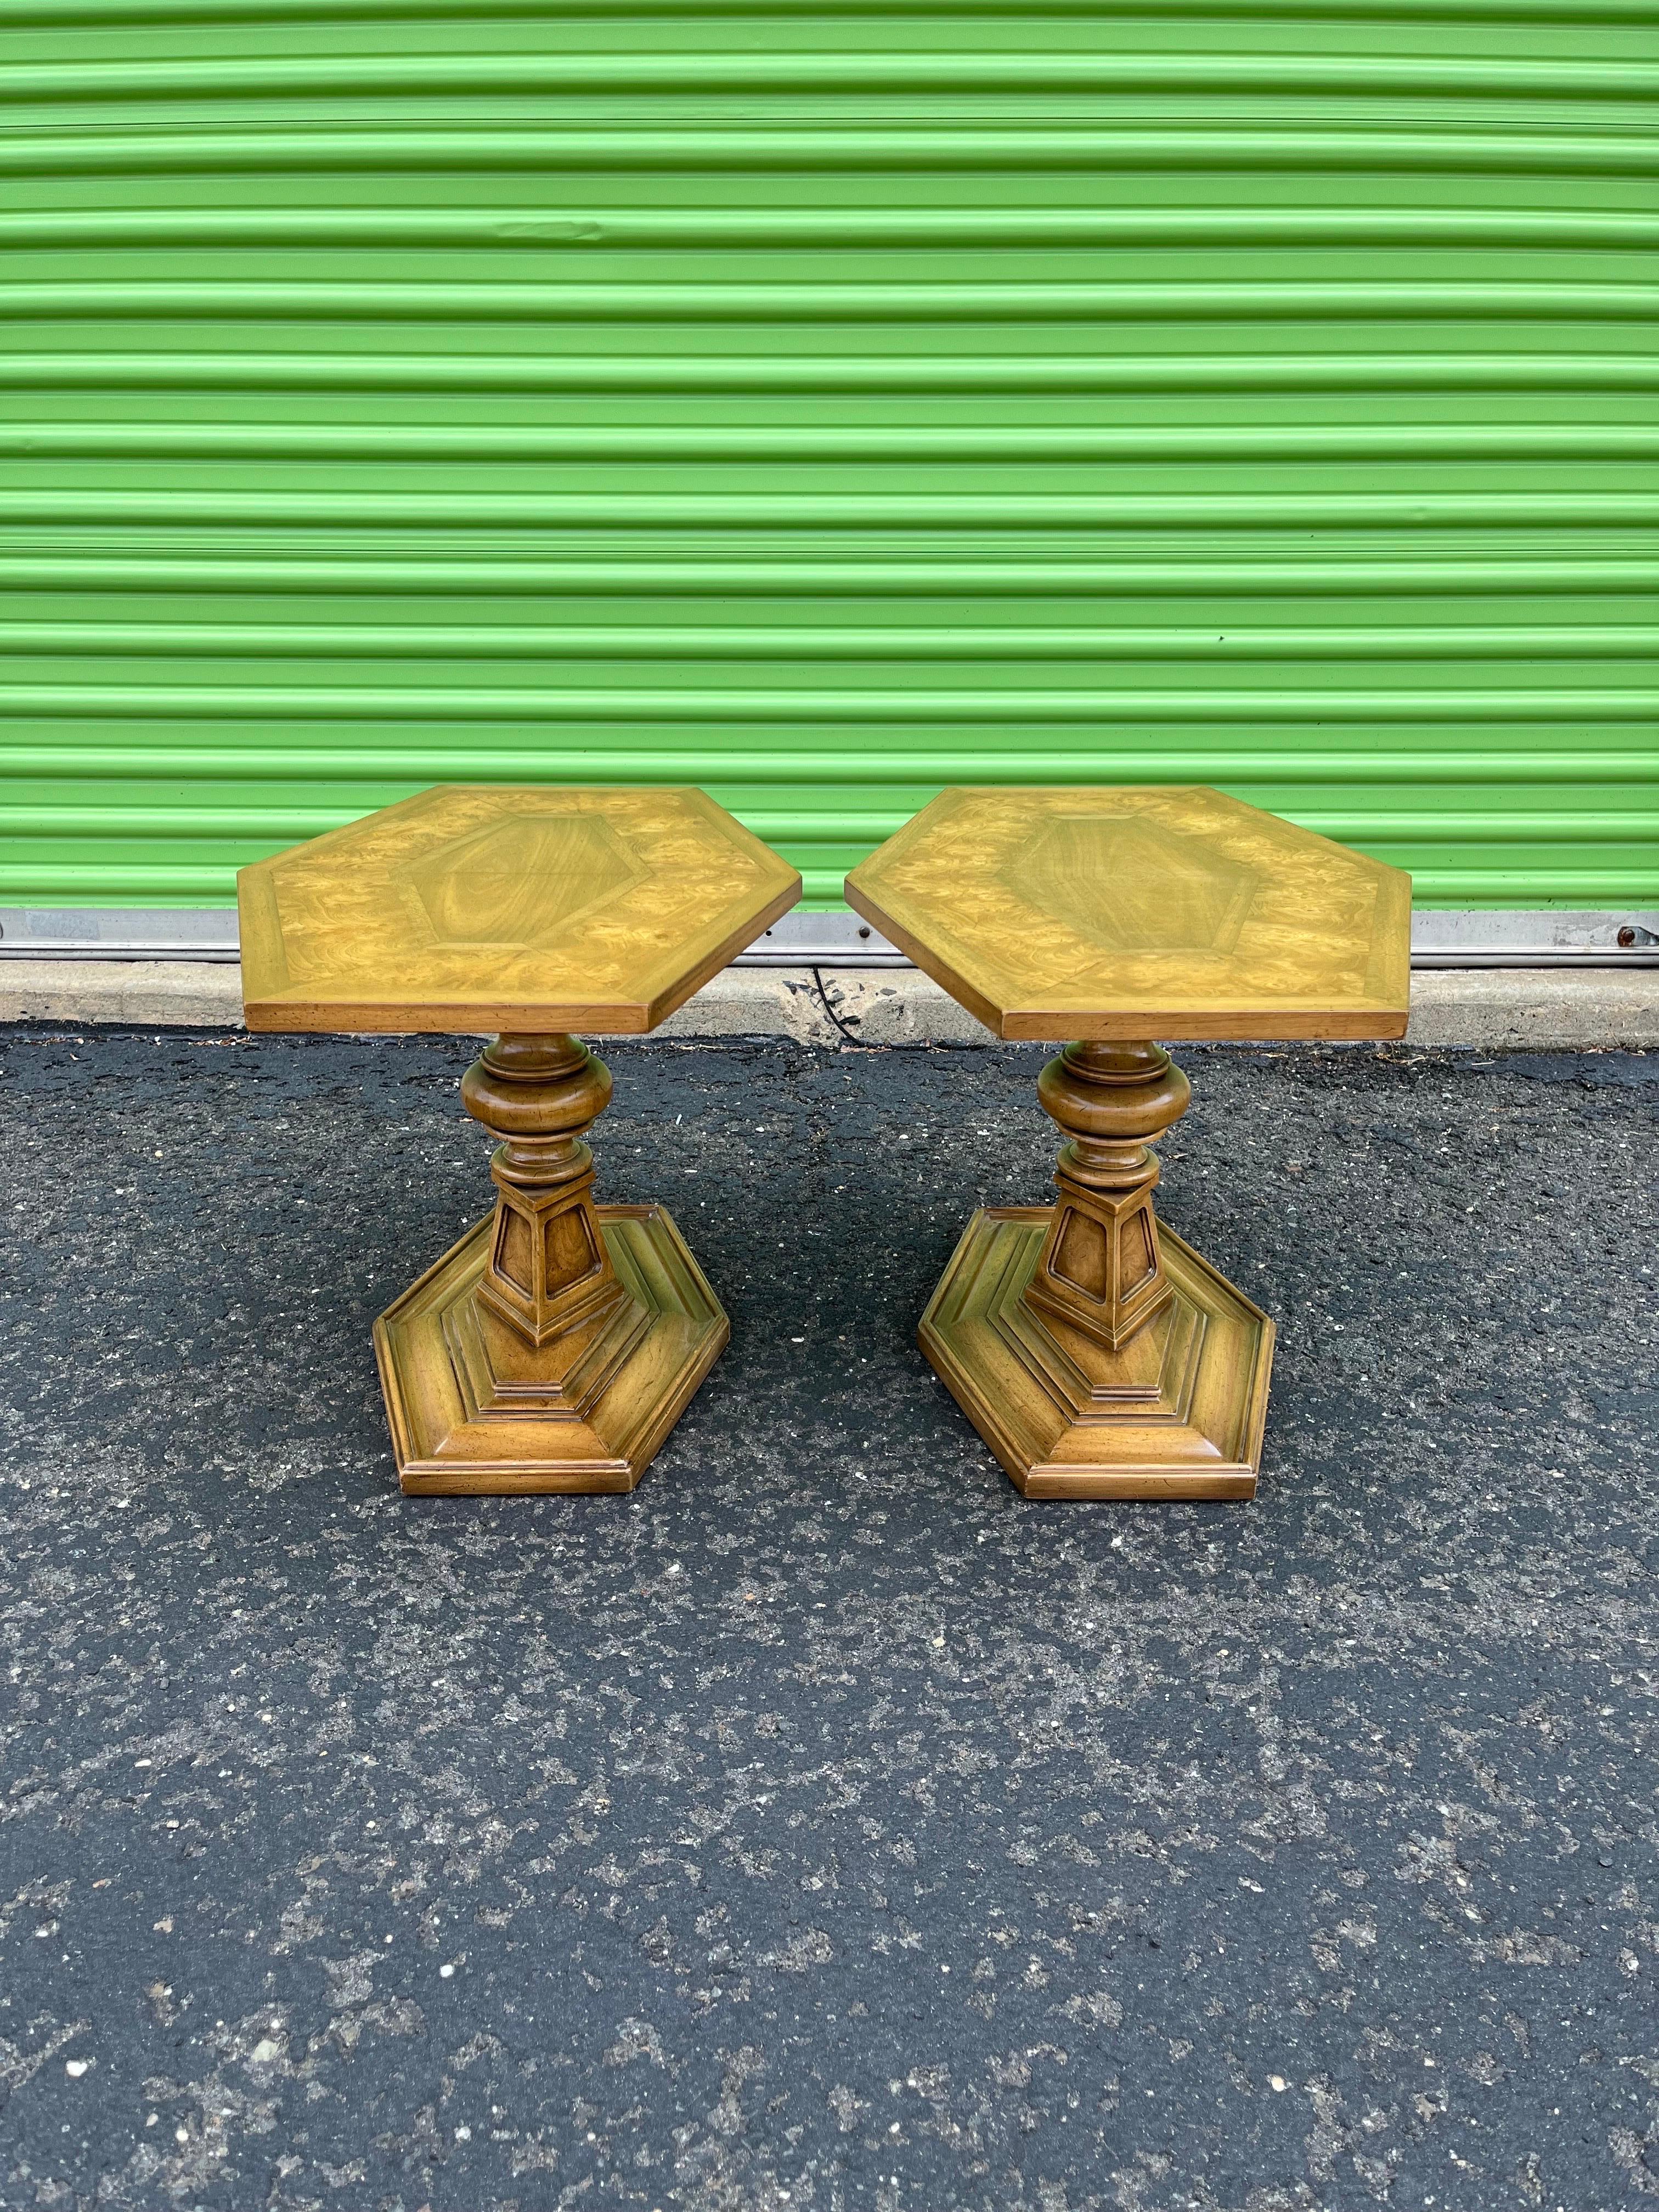 Unique Weiman Heirloom Capri Burl Hexagon side tables. Great veining in the burl with unique tapered hexagon styling. Sits atop modern neoclassical base.
Curbside to NYC/Philly $350